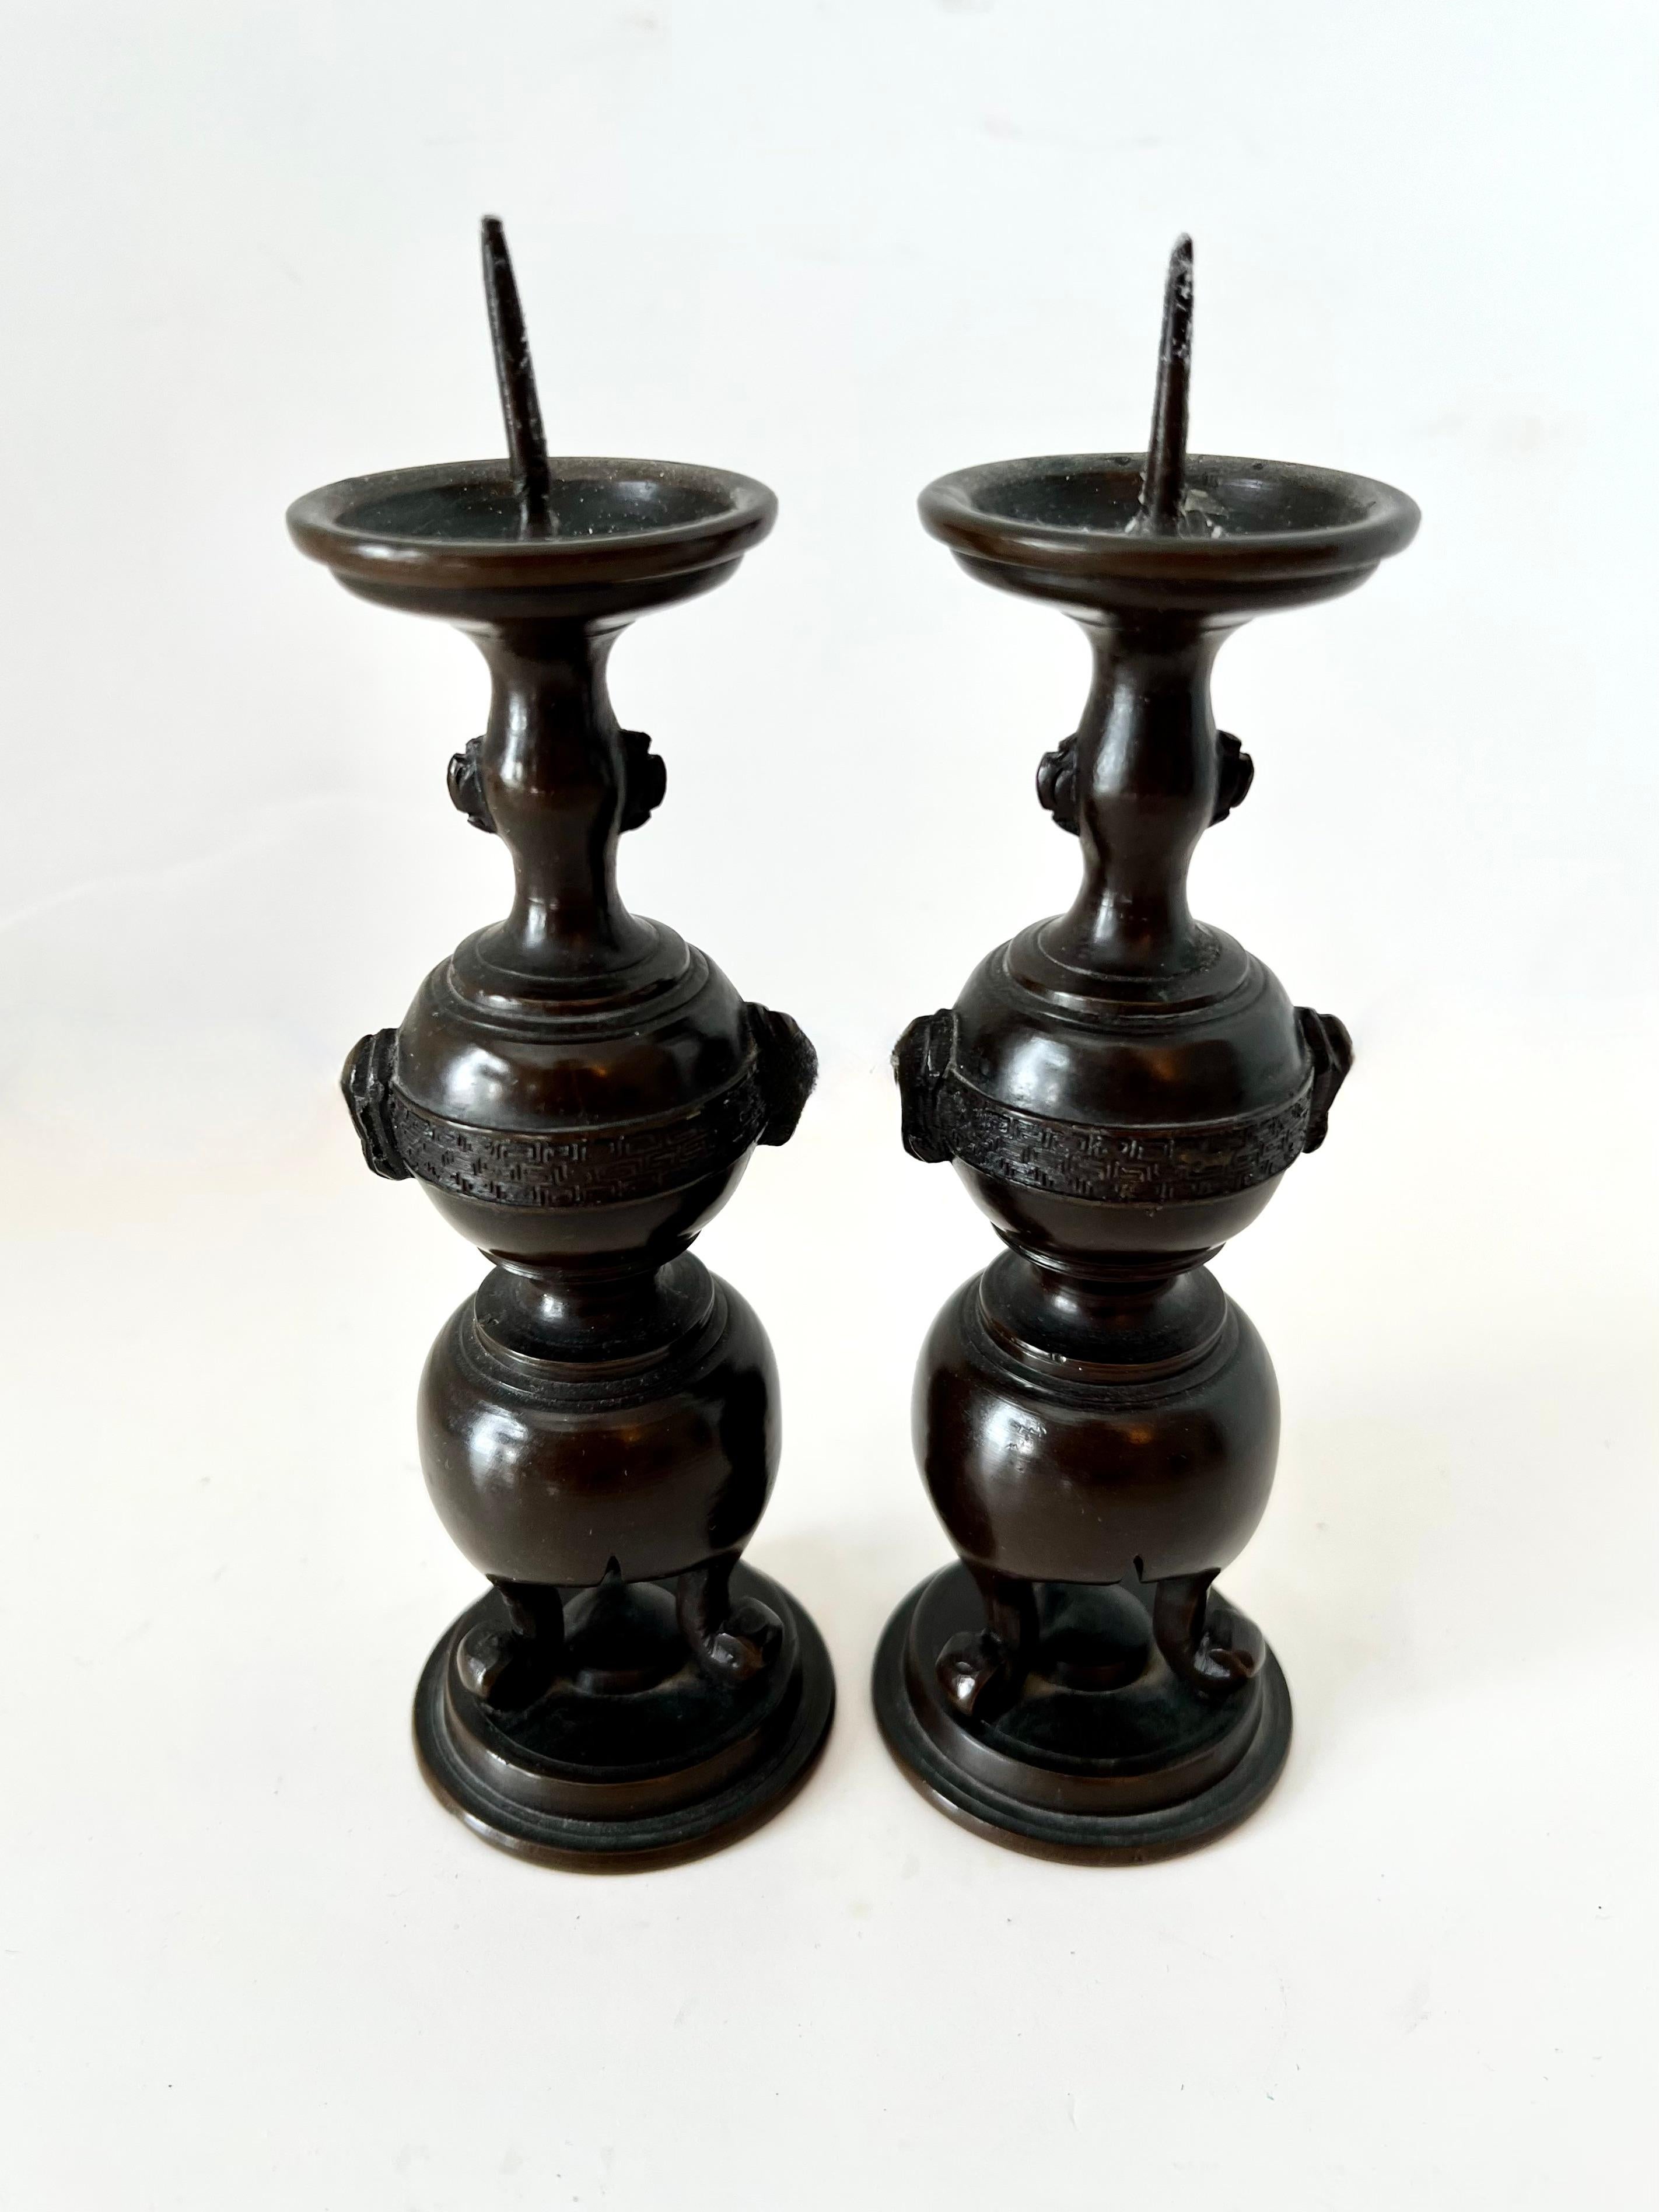 A wonderful pair of Japanese Bronze Candlesticks.  The pair make a lovely pair for a small dining table or on a side table, mantle or shelf.

In the Style of Meiji Period with a patinated bronze - 